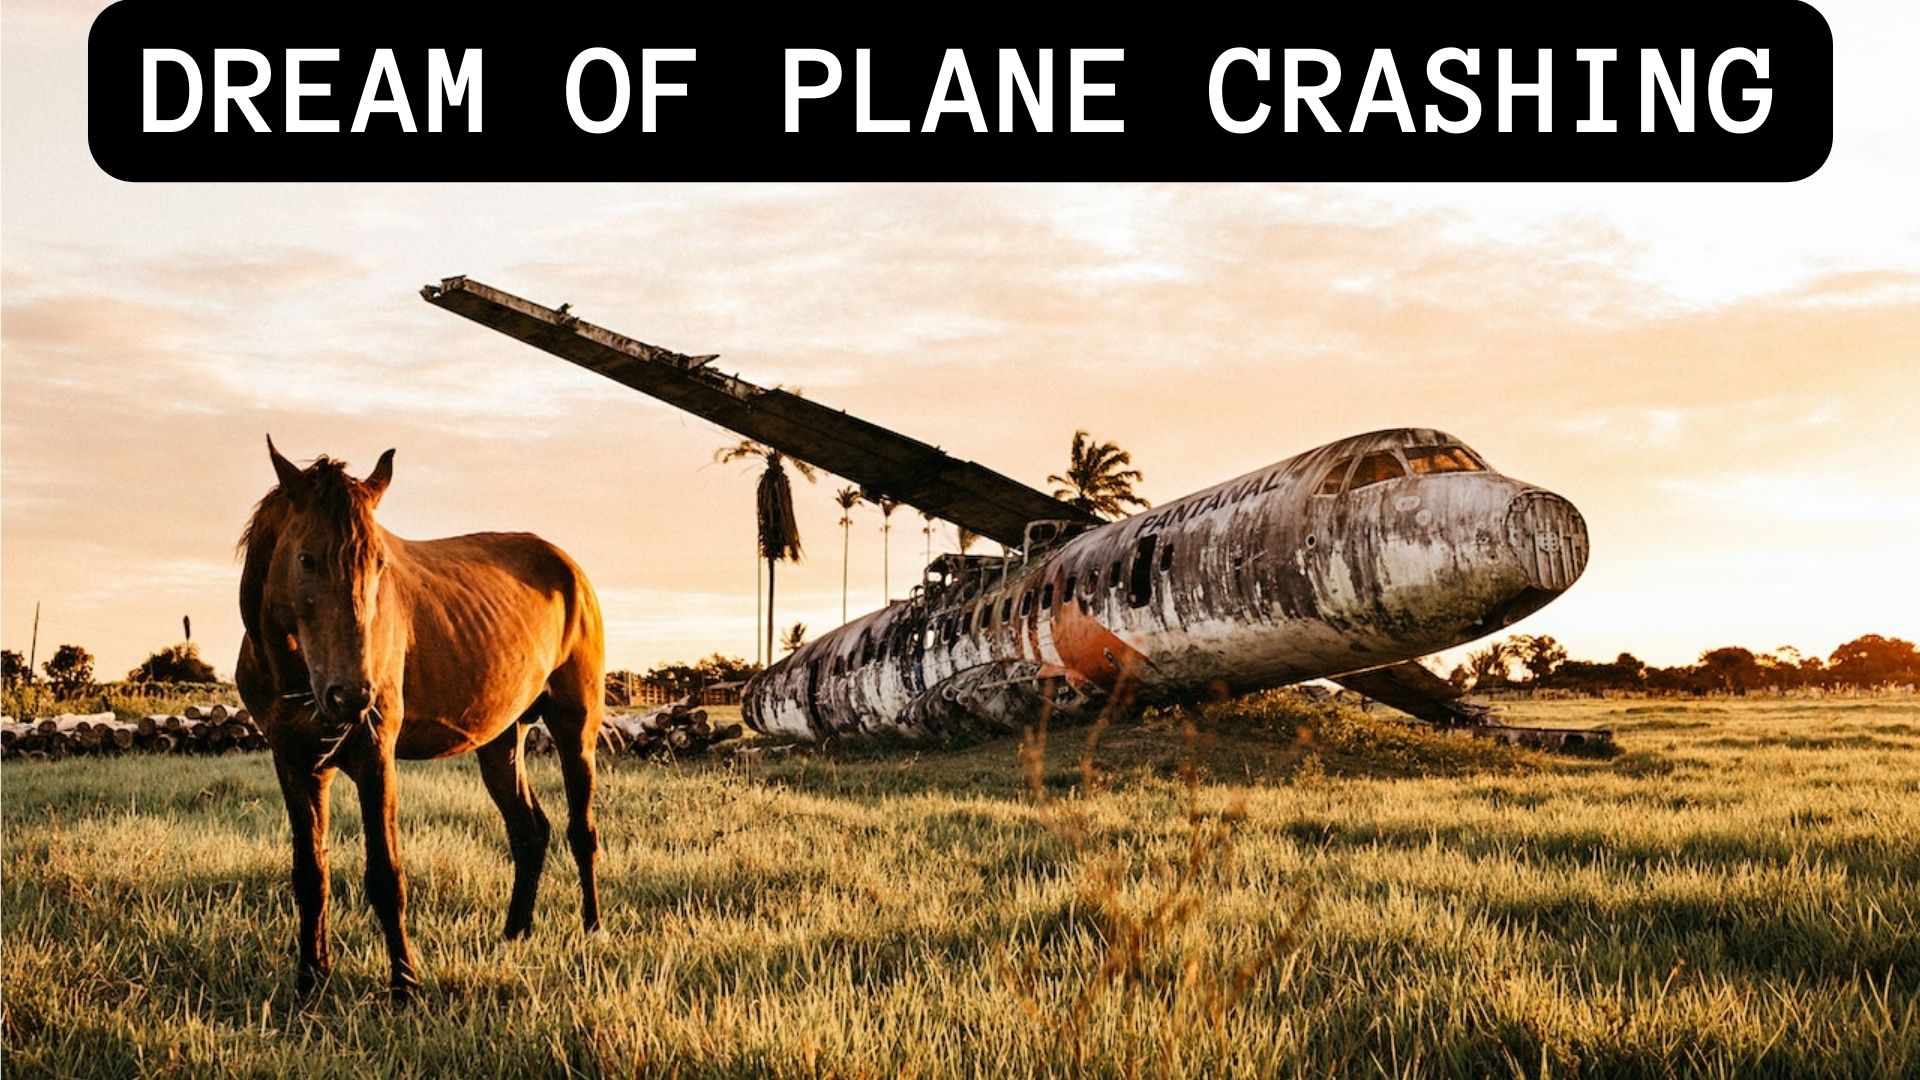 Dream Of Plane Crashing Means Good News Is On Its Way